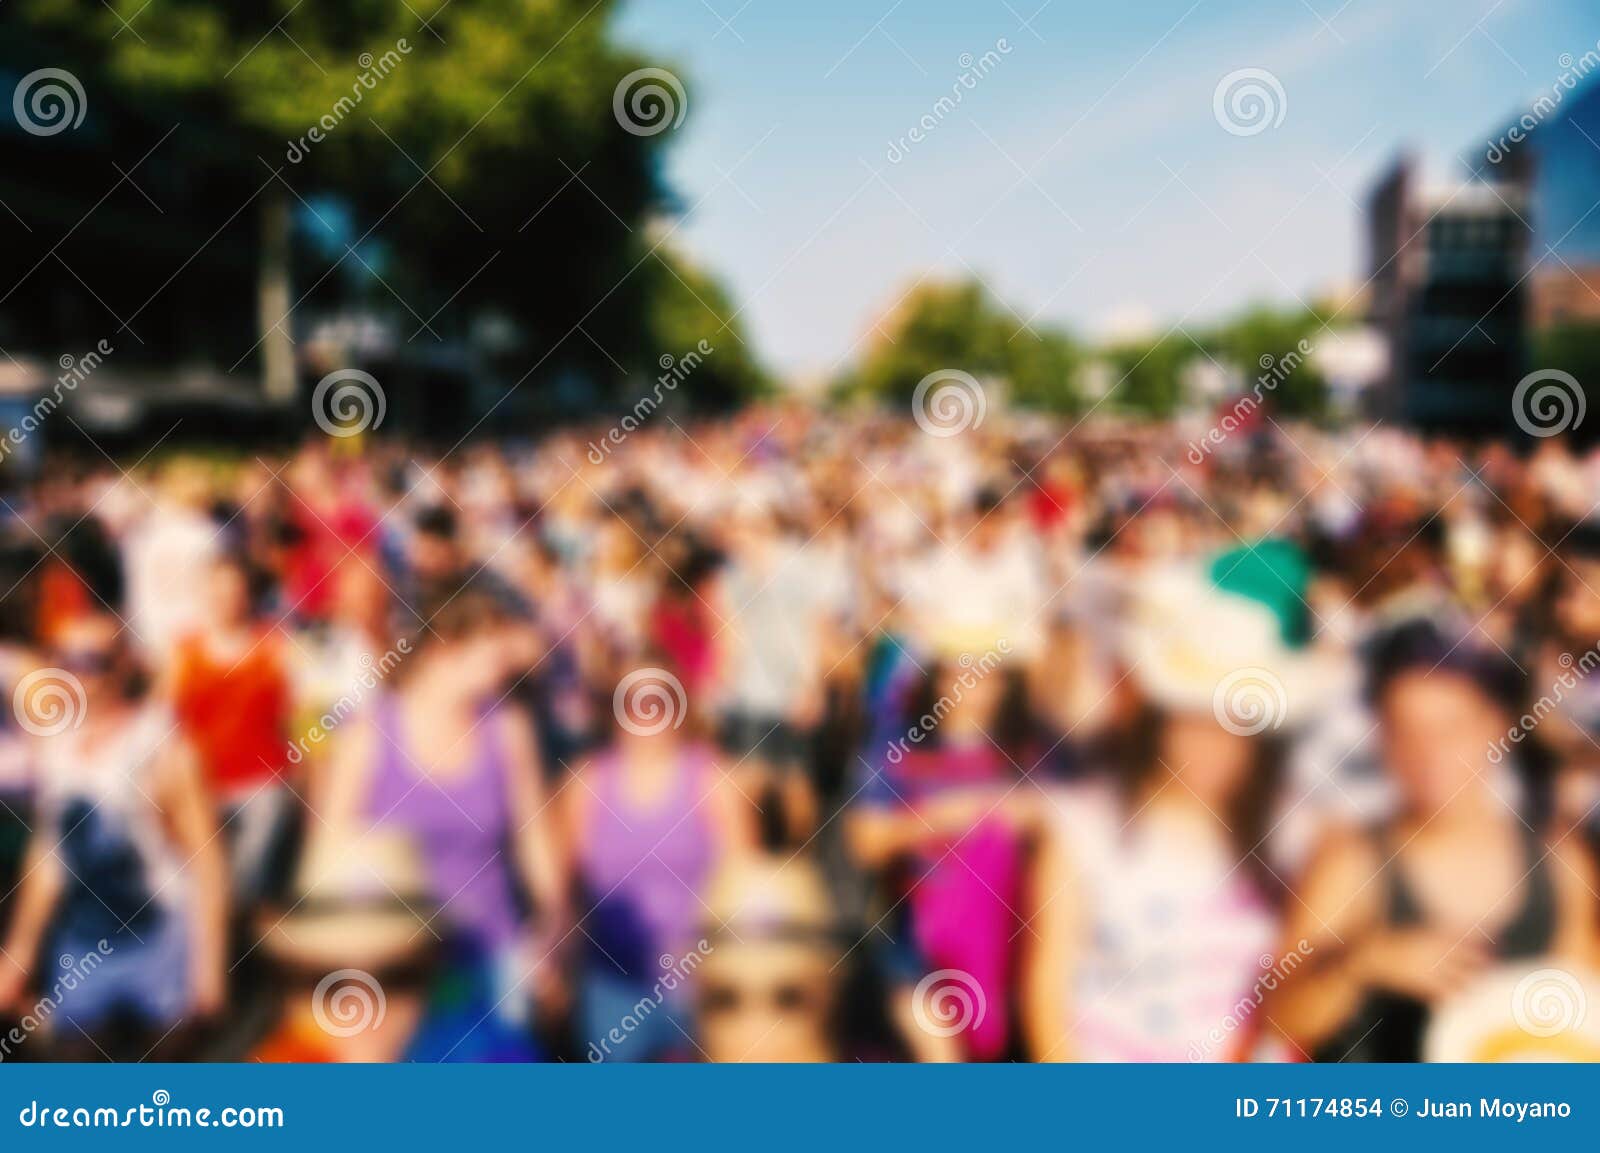 defocused background of people partying or marching outdoors